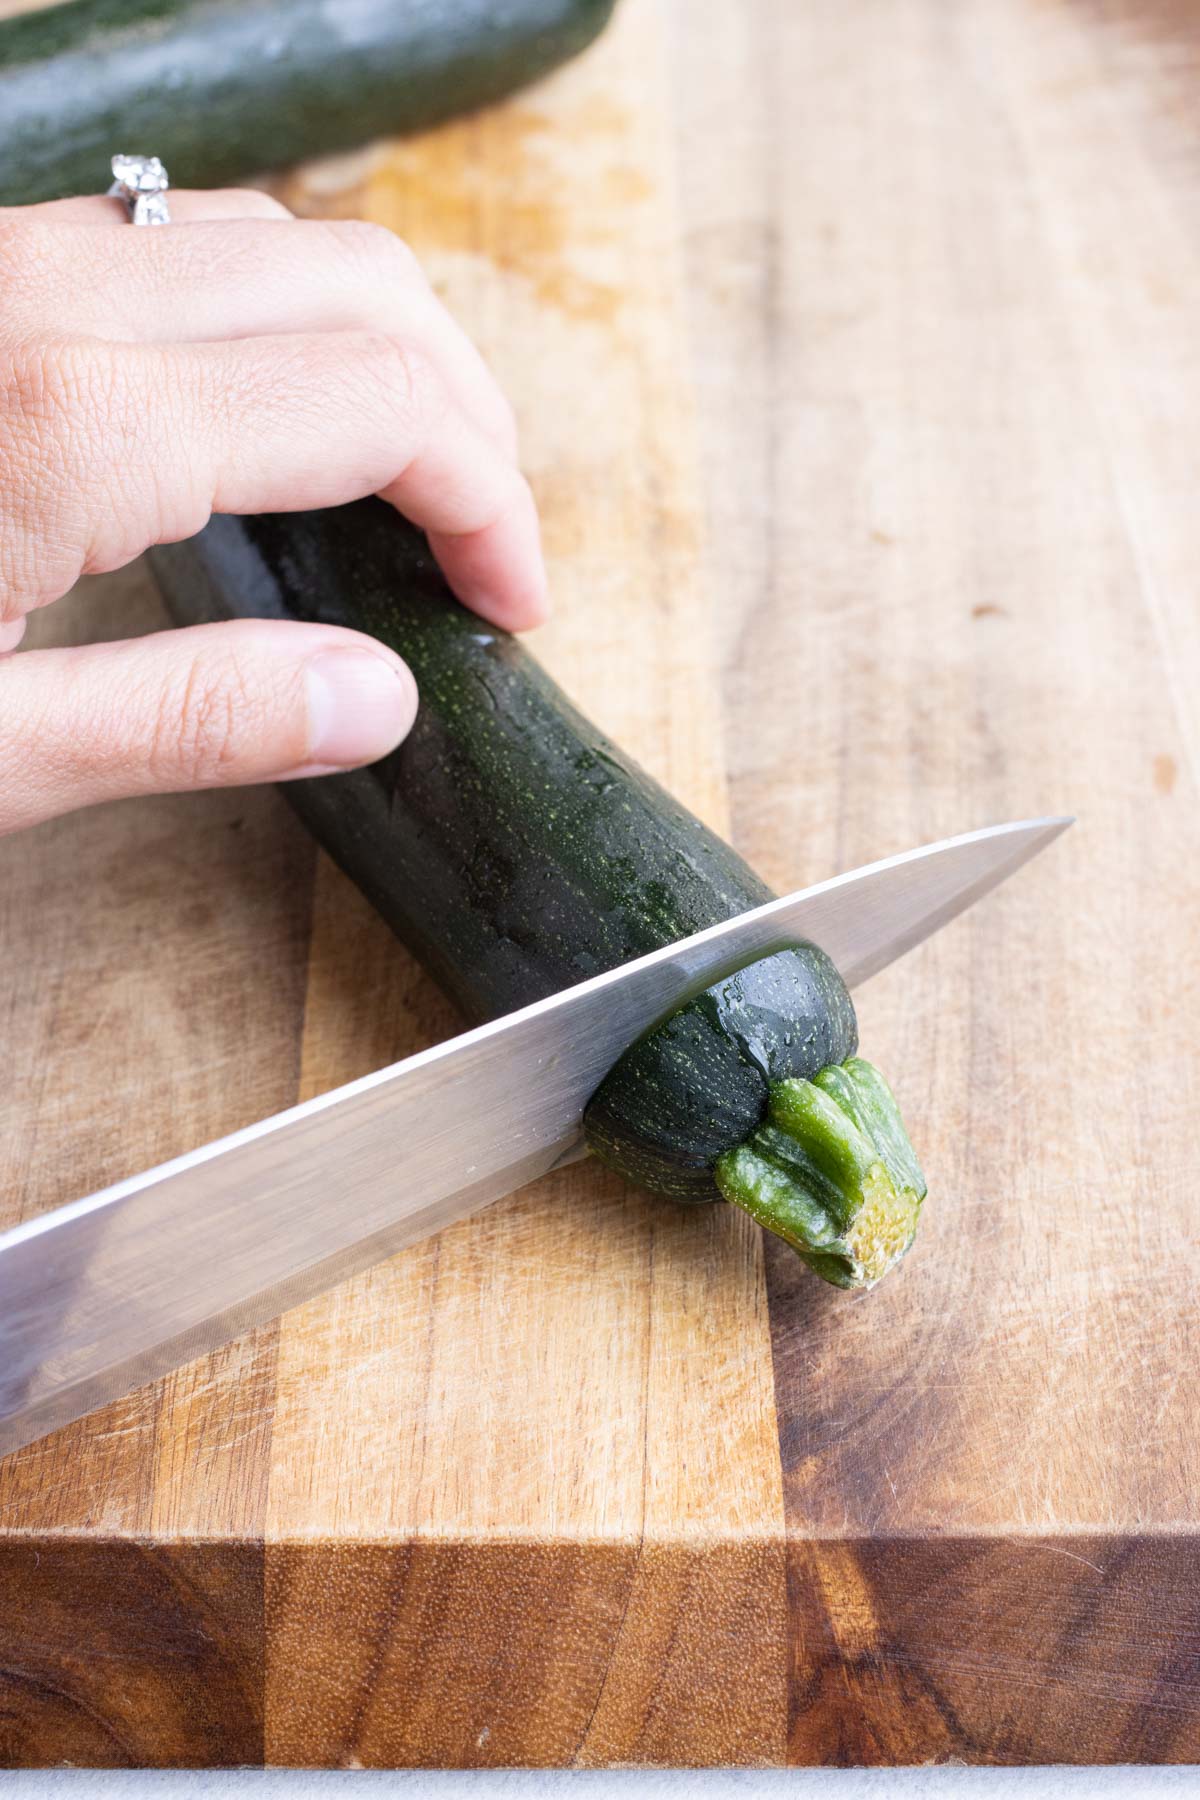 A sharp knife slices the end of a zucchini on a cutting board.